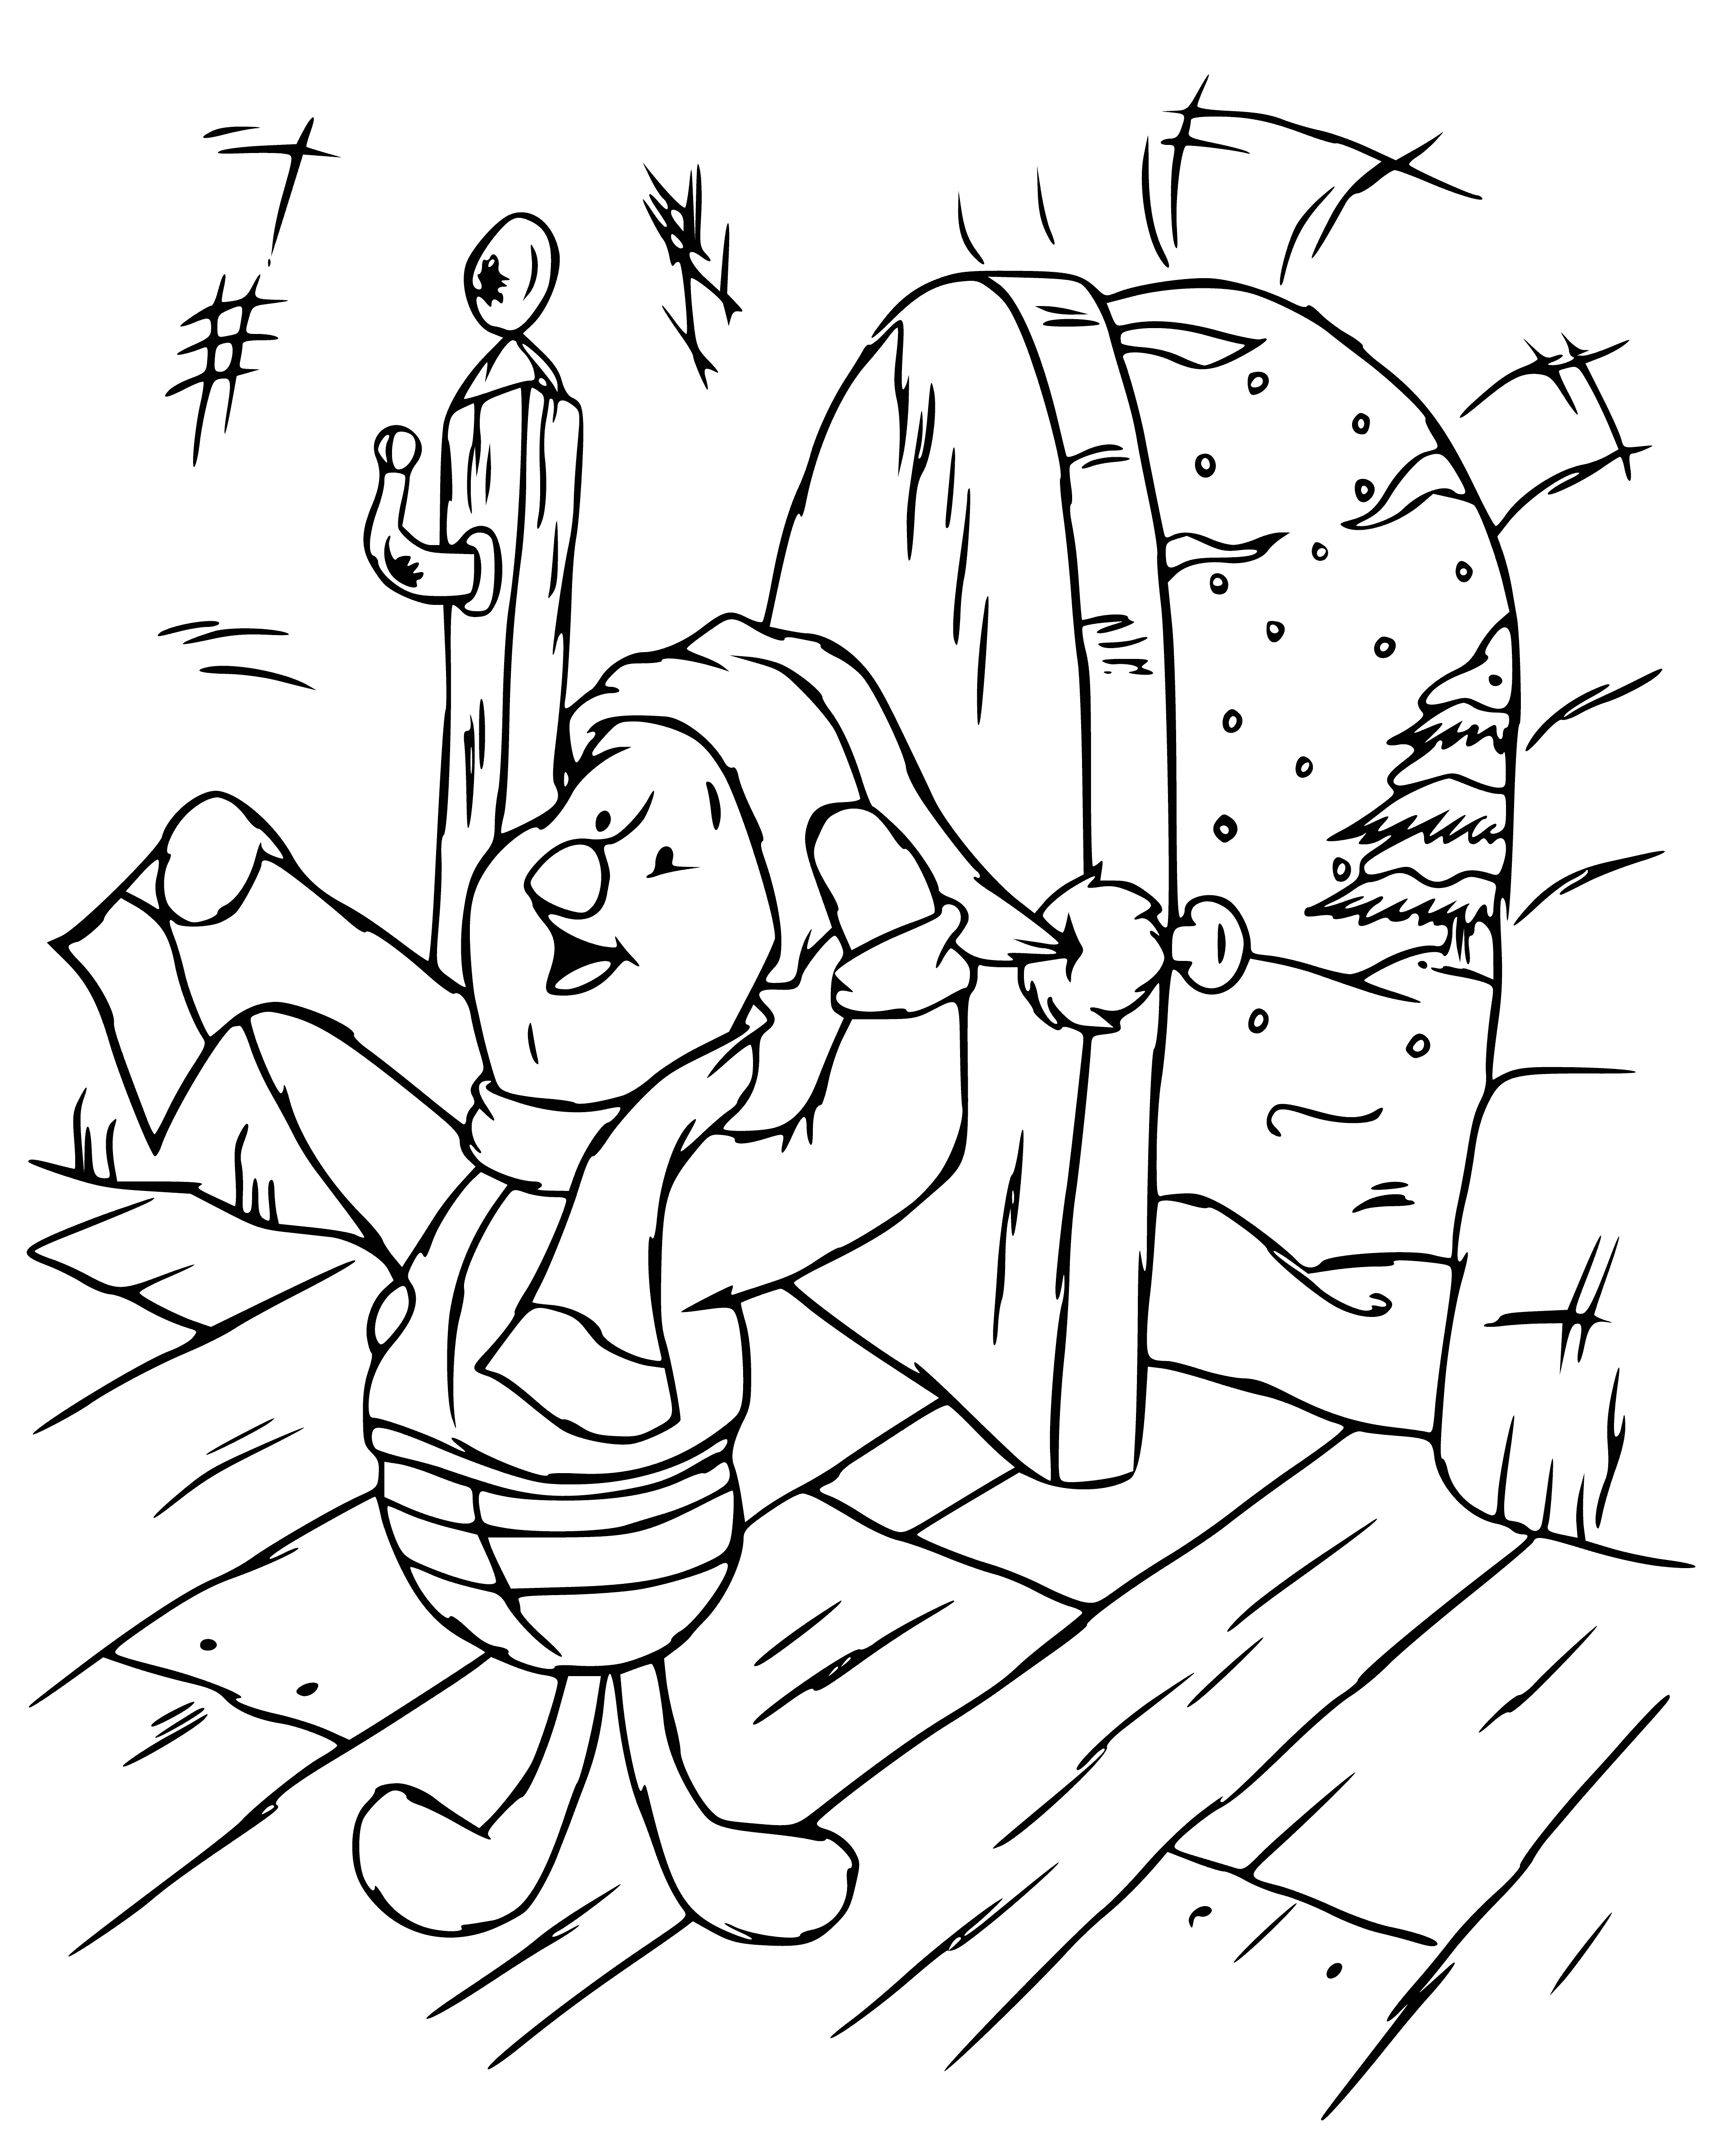 coloring page: Pig & Piglet celebrate New Year wearing party hats, holding noisemakers and in front of large clock reading "Happy New Year!"